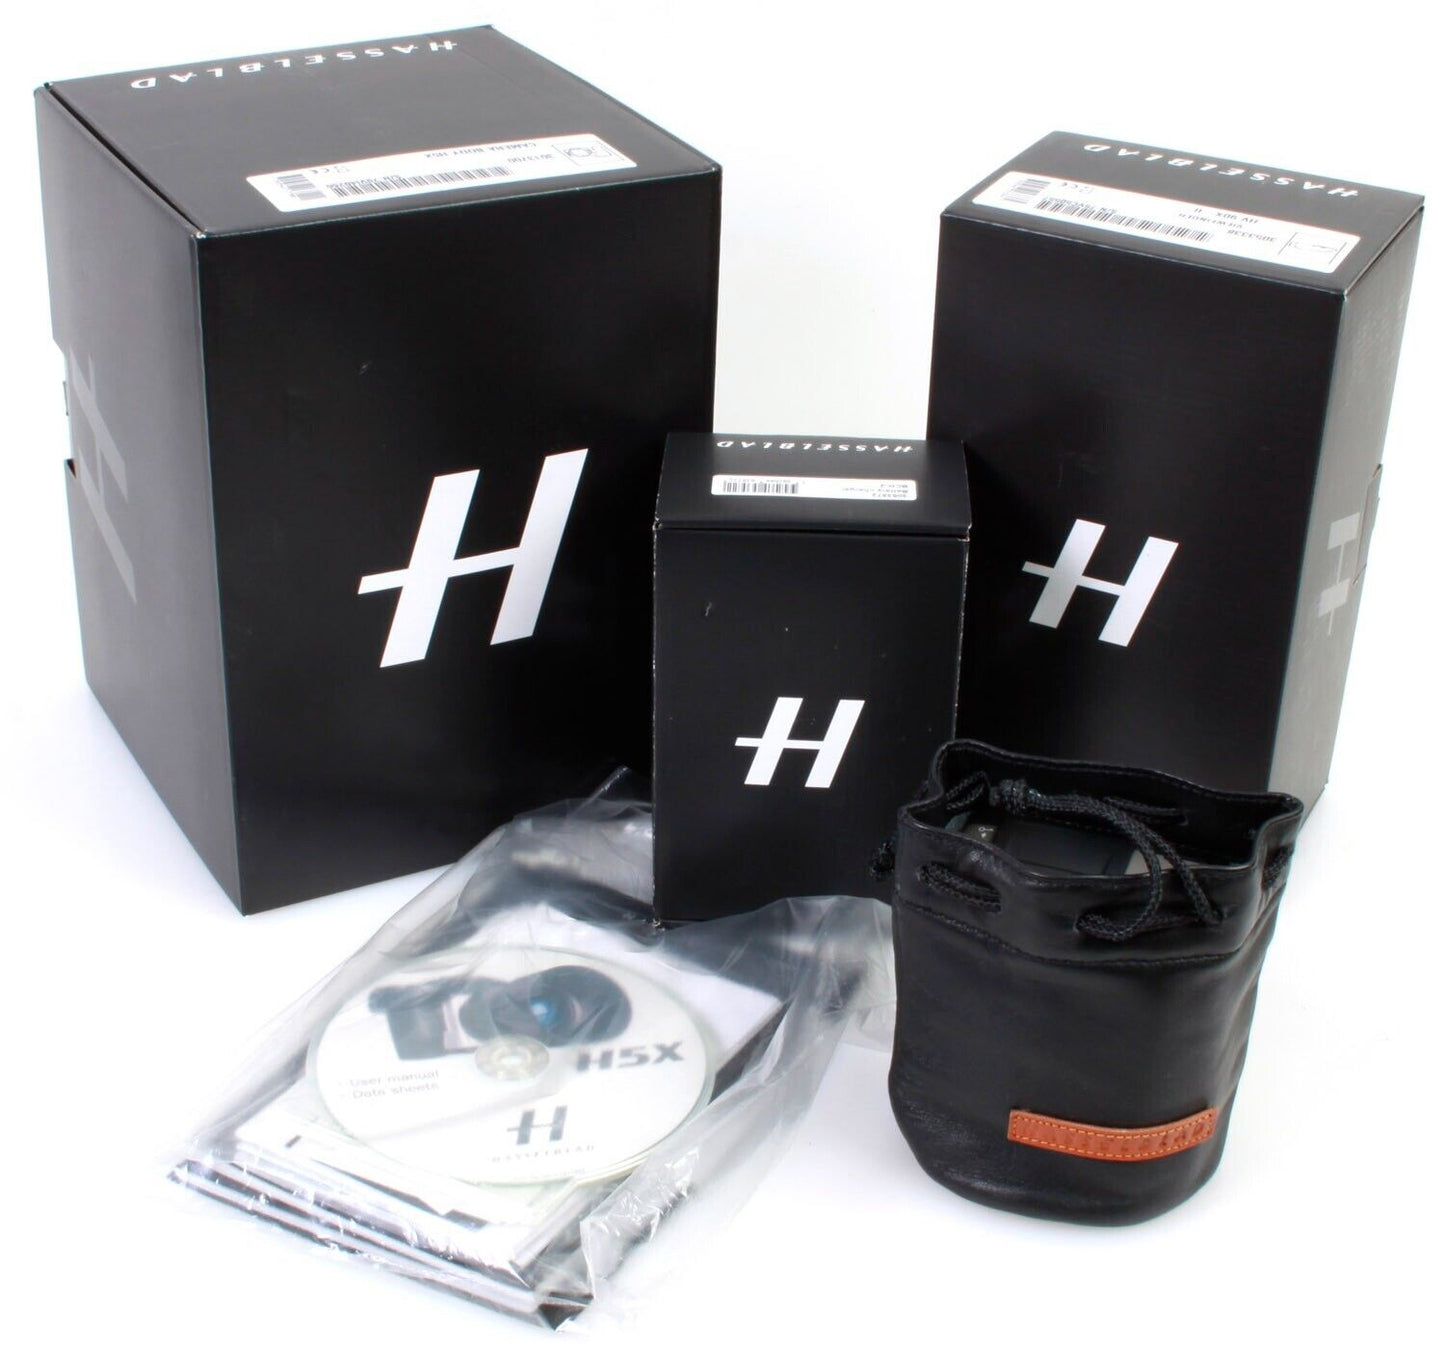 Hasselblad H5X Camera Body w/ HV 90X Grip&Viewfinder, HM 16 32 Film Back w/Boxes